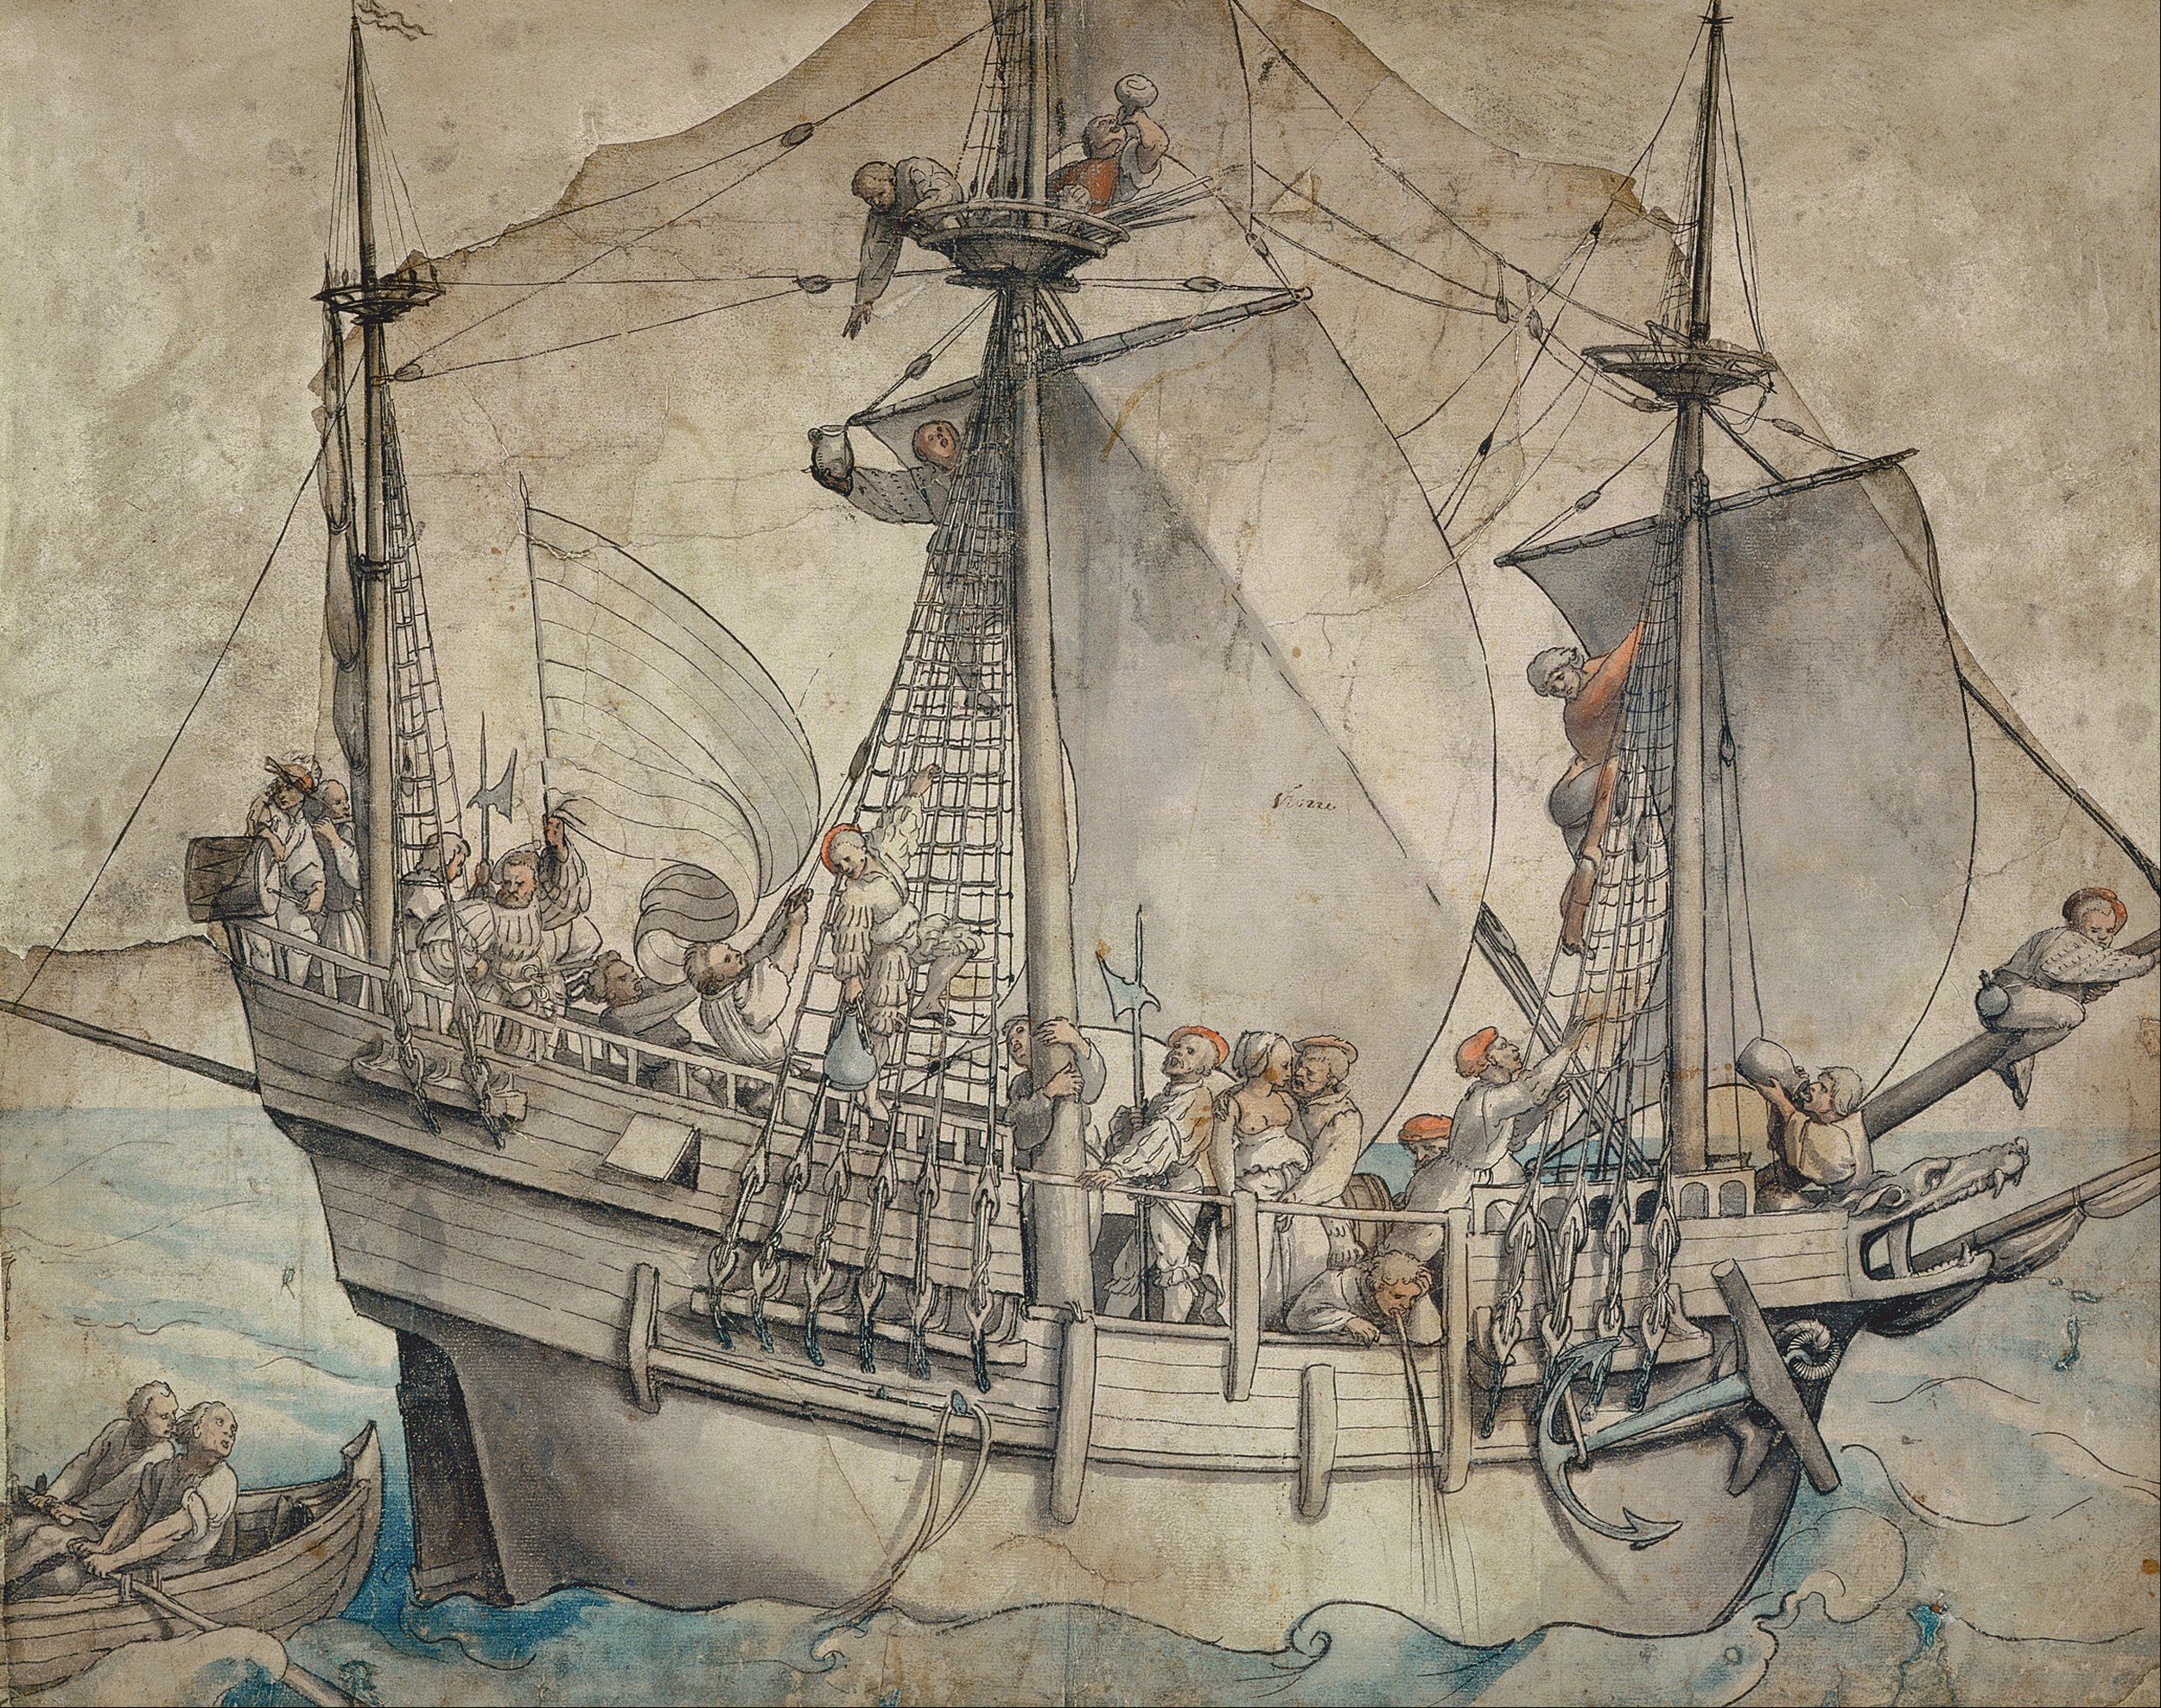 Something fishy about the sinking of the Danish king’s ship 525 years ago